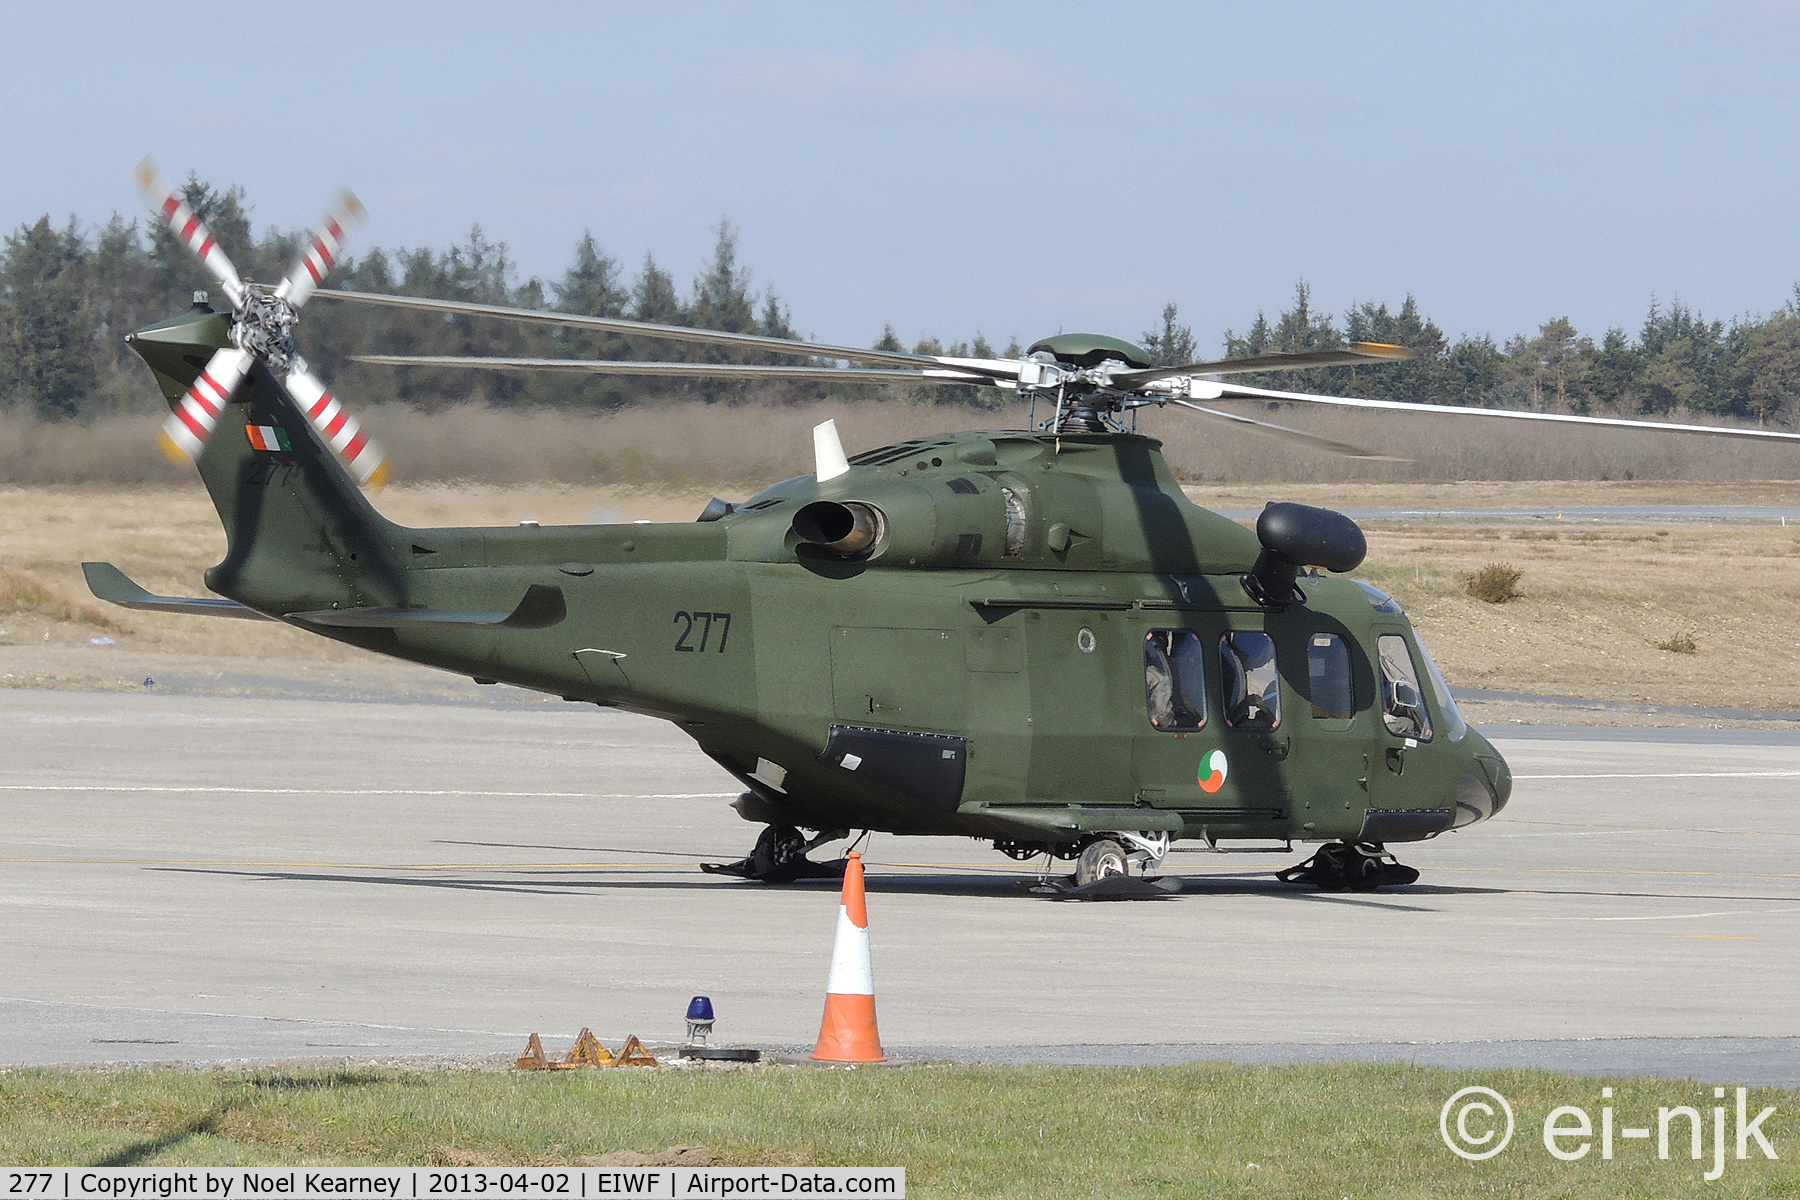 277, AgustaWestland AW-139 C/N 31078, Photographed the Irish Air Corps AW139 after it had just landed on the apron at Waterford.